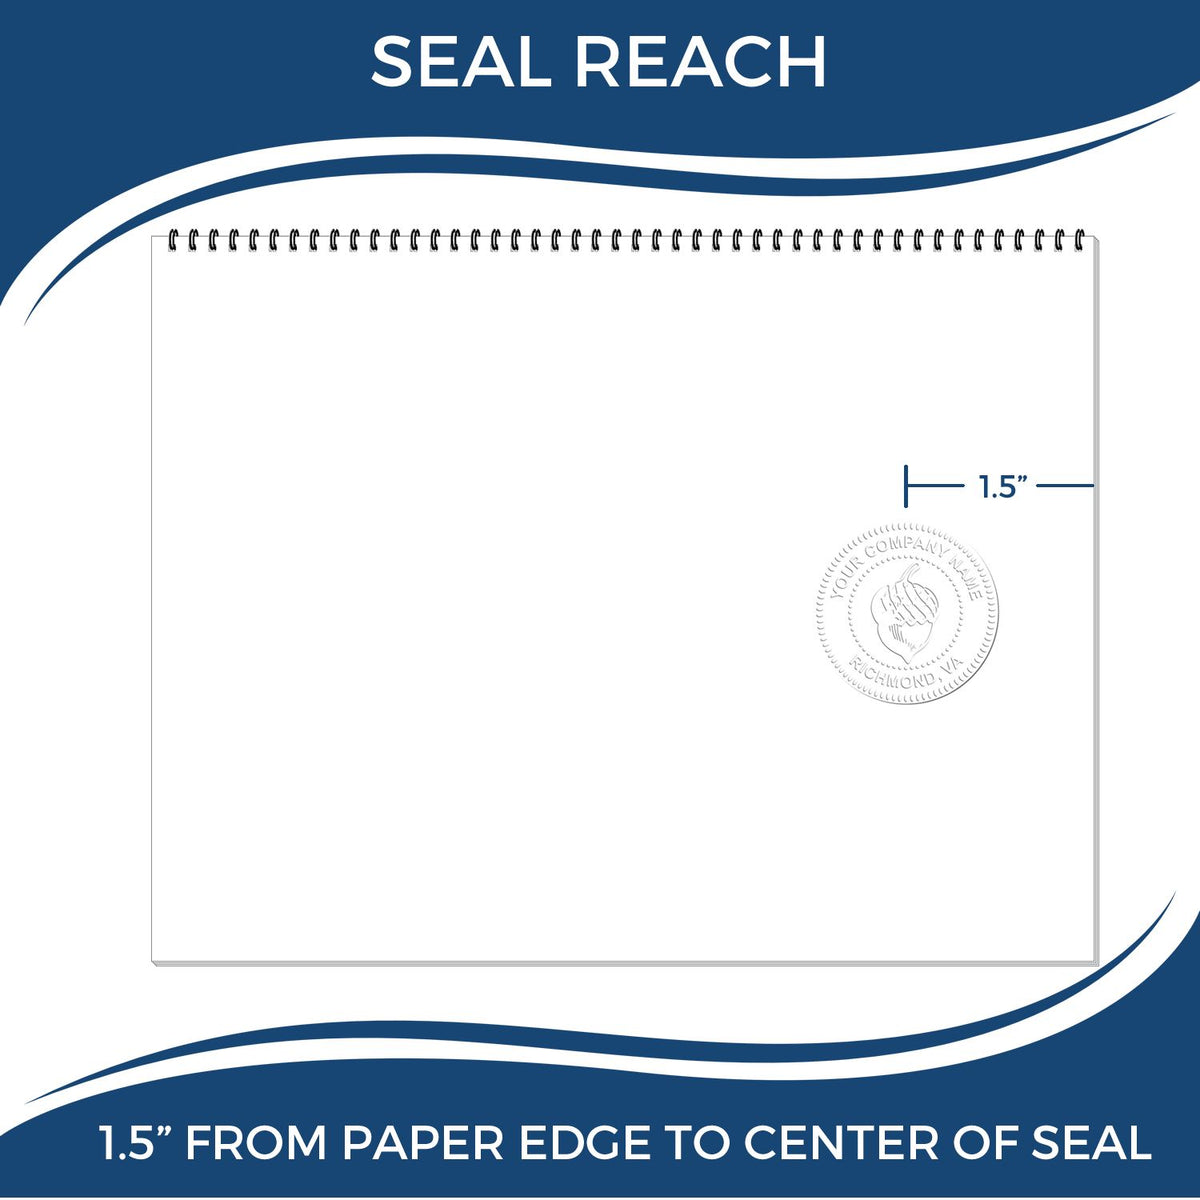 An infographic showing the seal reach which is represented by a ruler and a miniature seal image of the Hybrid Florida Landscape Architect Seal